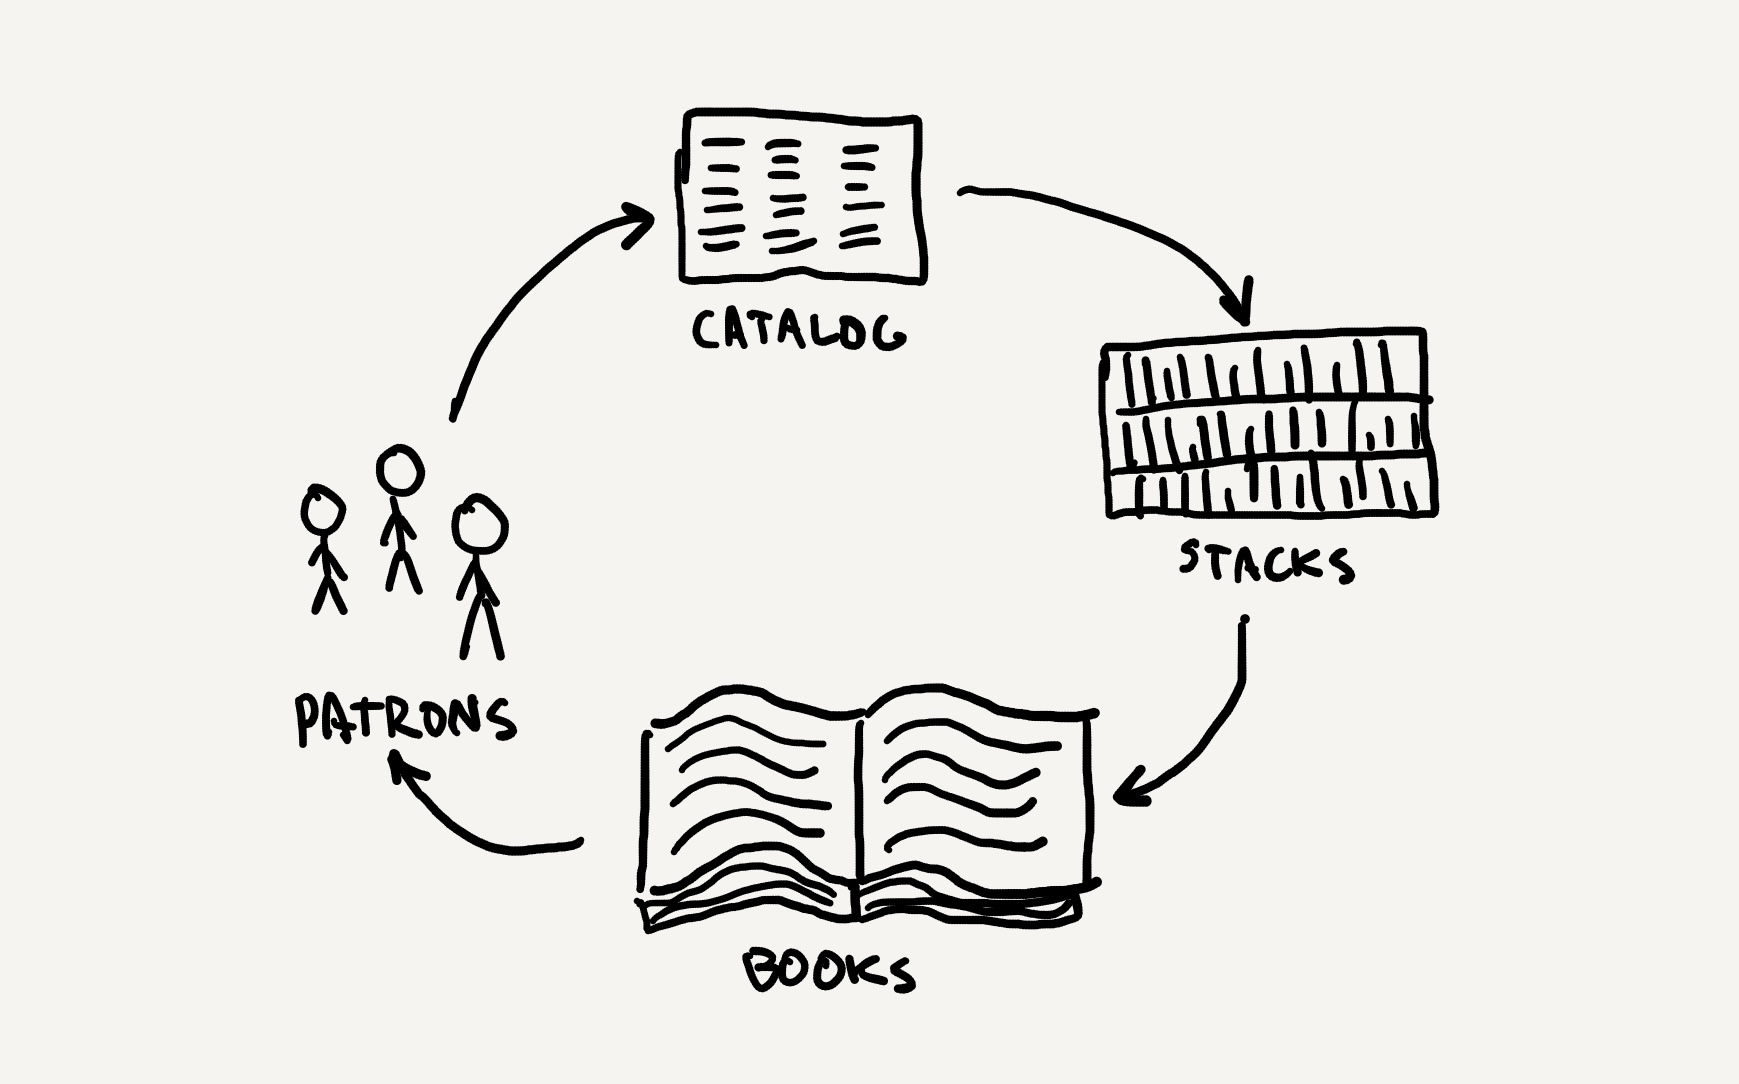 A diagram depicting the process of a basic library, including a cycle of patrons, a catalog, book stacks, and books.